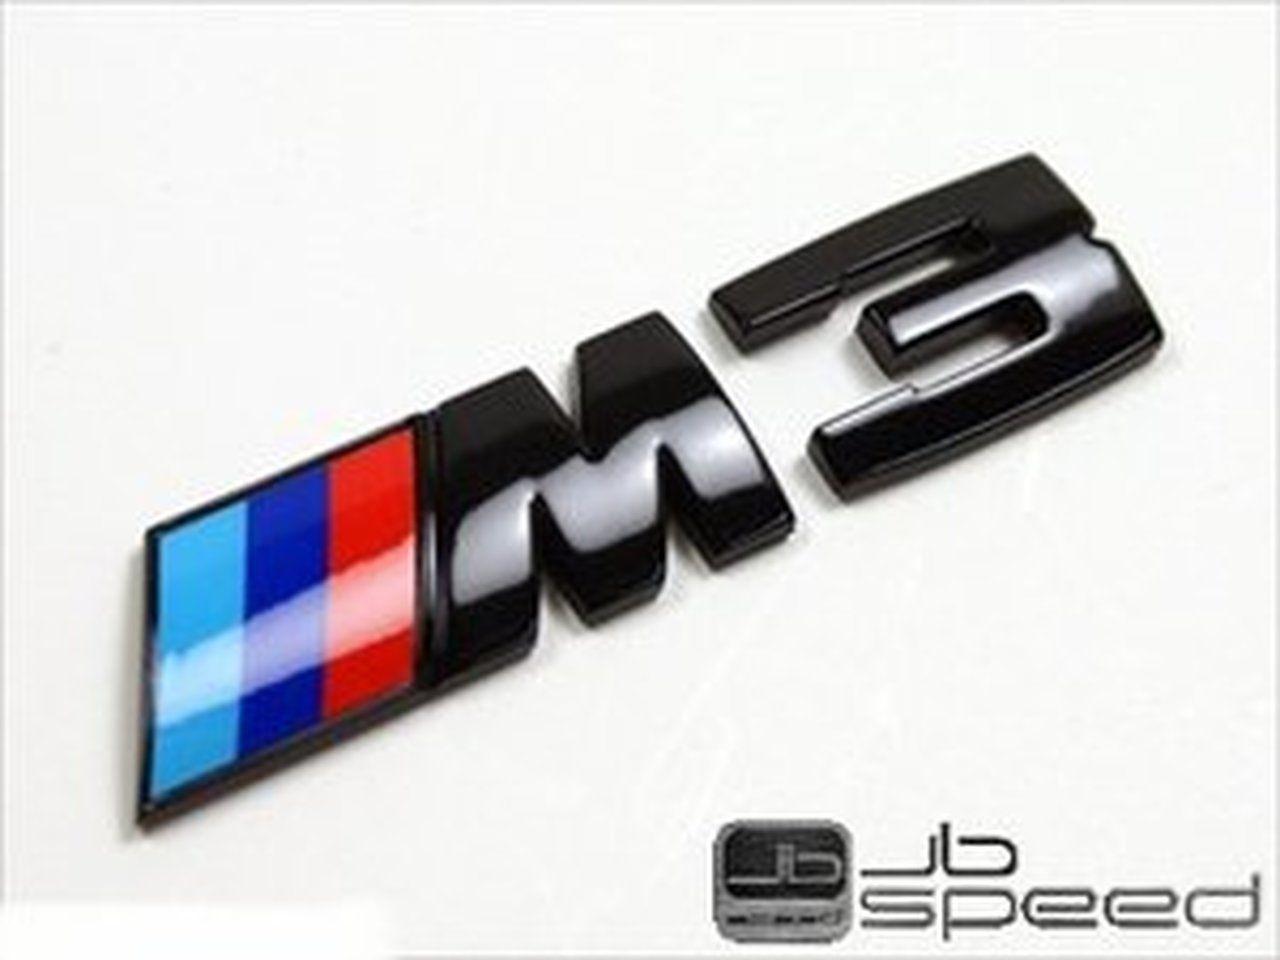 M3 Logo - BMW Gloss Black M3 Trunk Badge for E9x M3 Free Shipping within